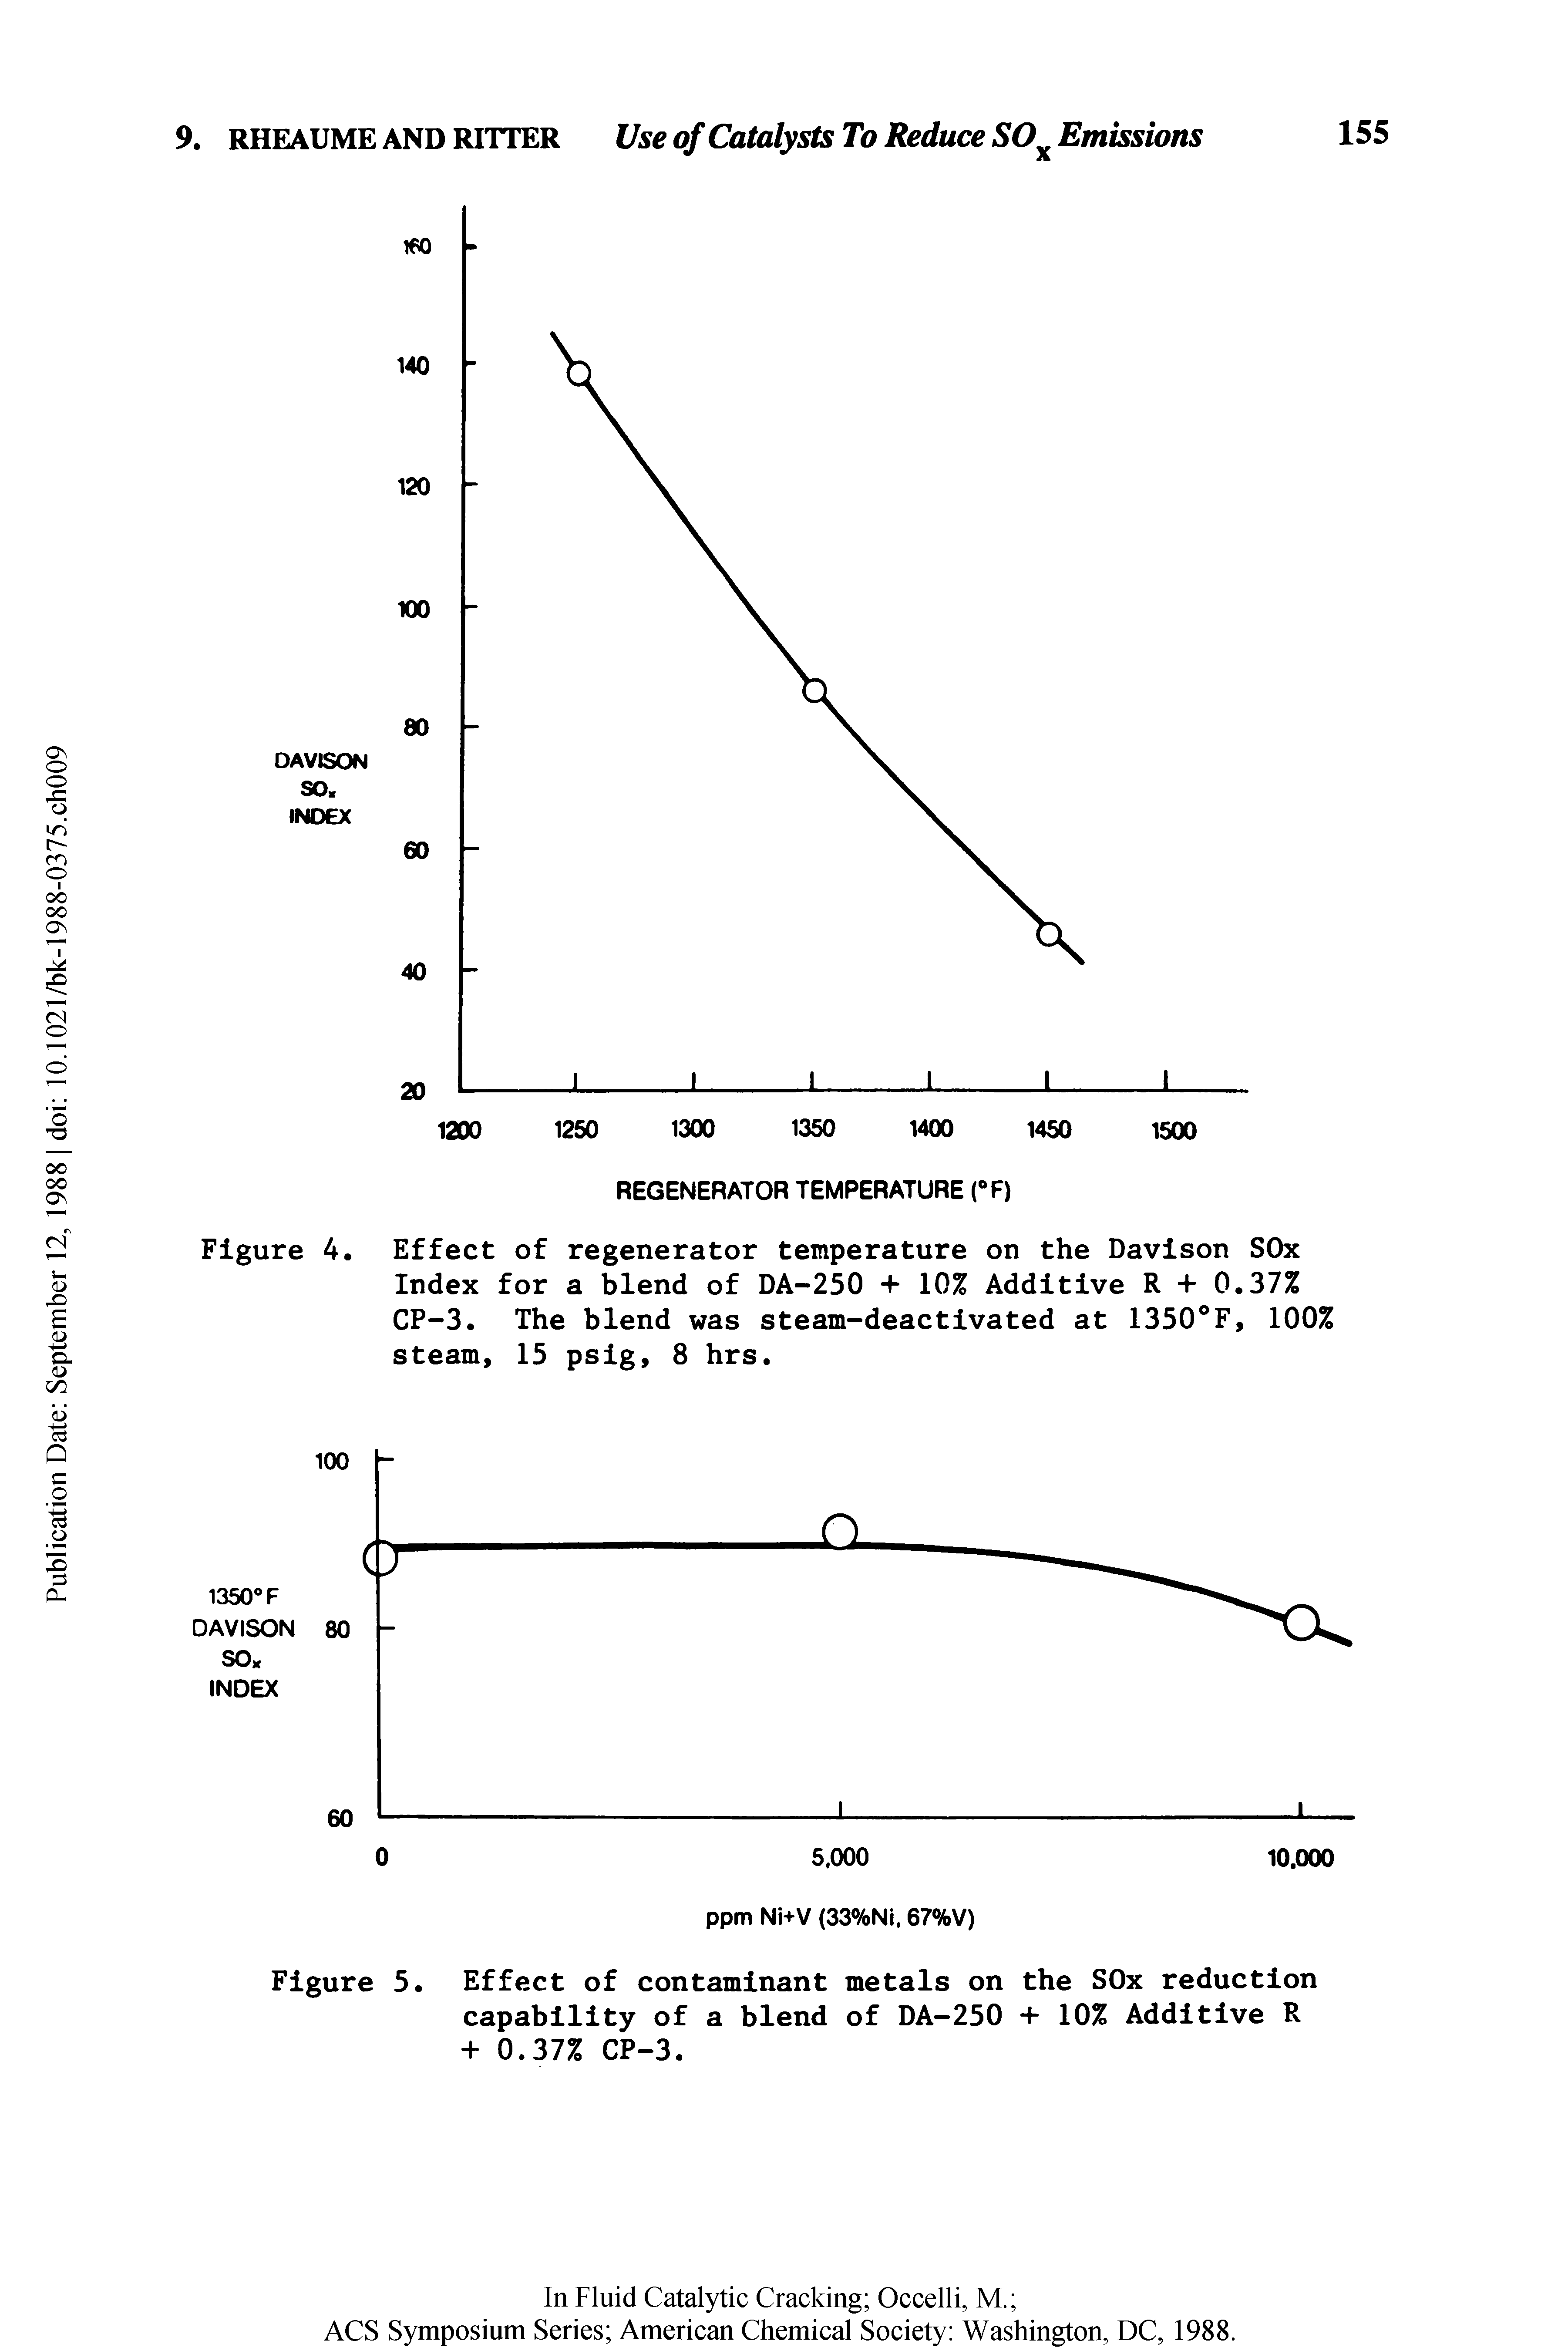 Figure 4. Effect of regenerator temperature on the Davison SOx Index for a blend of DA-250 + 10% Additive R + 0.37% CP-3. The blend was steam-deactivated at 1350 F, 100% steam, 15 psig, 8 hrs.